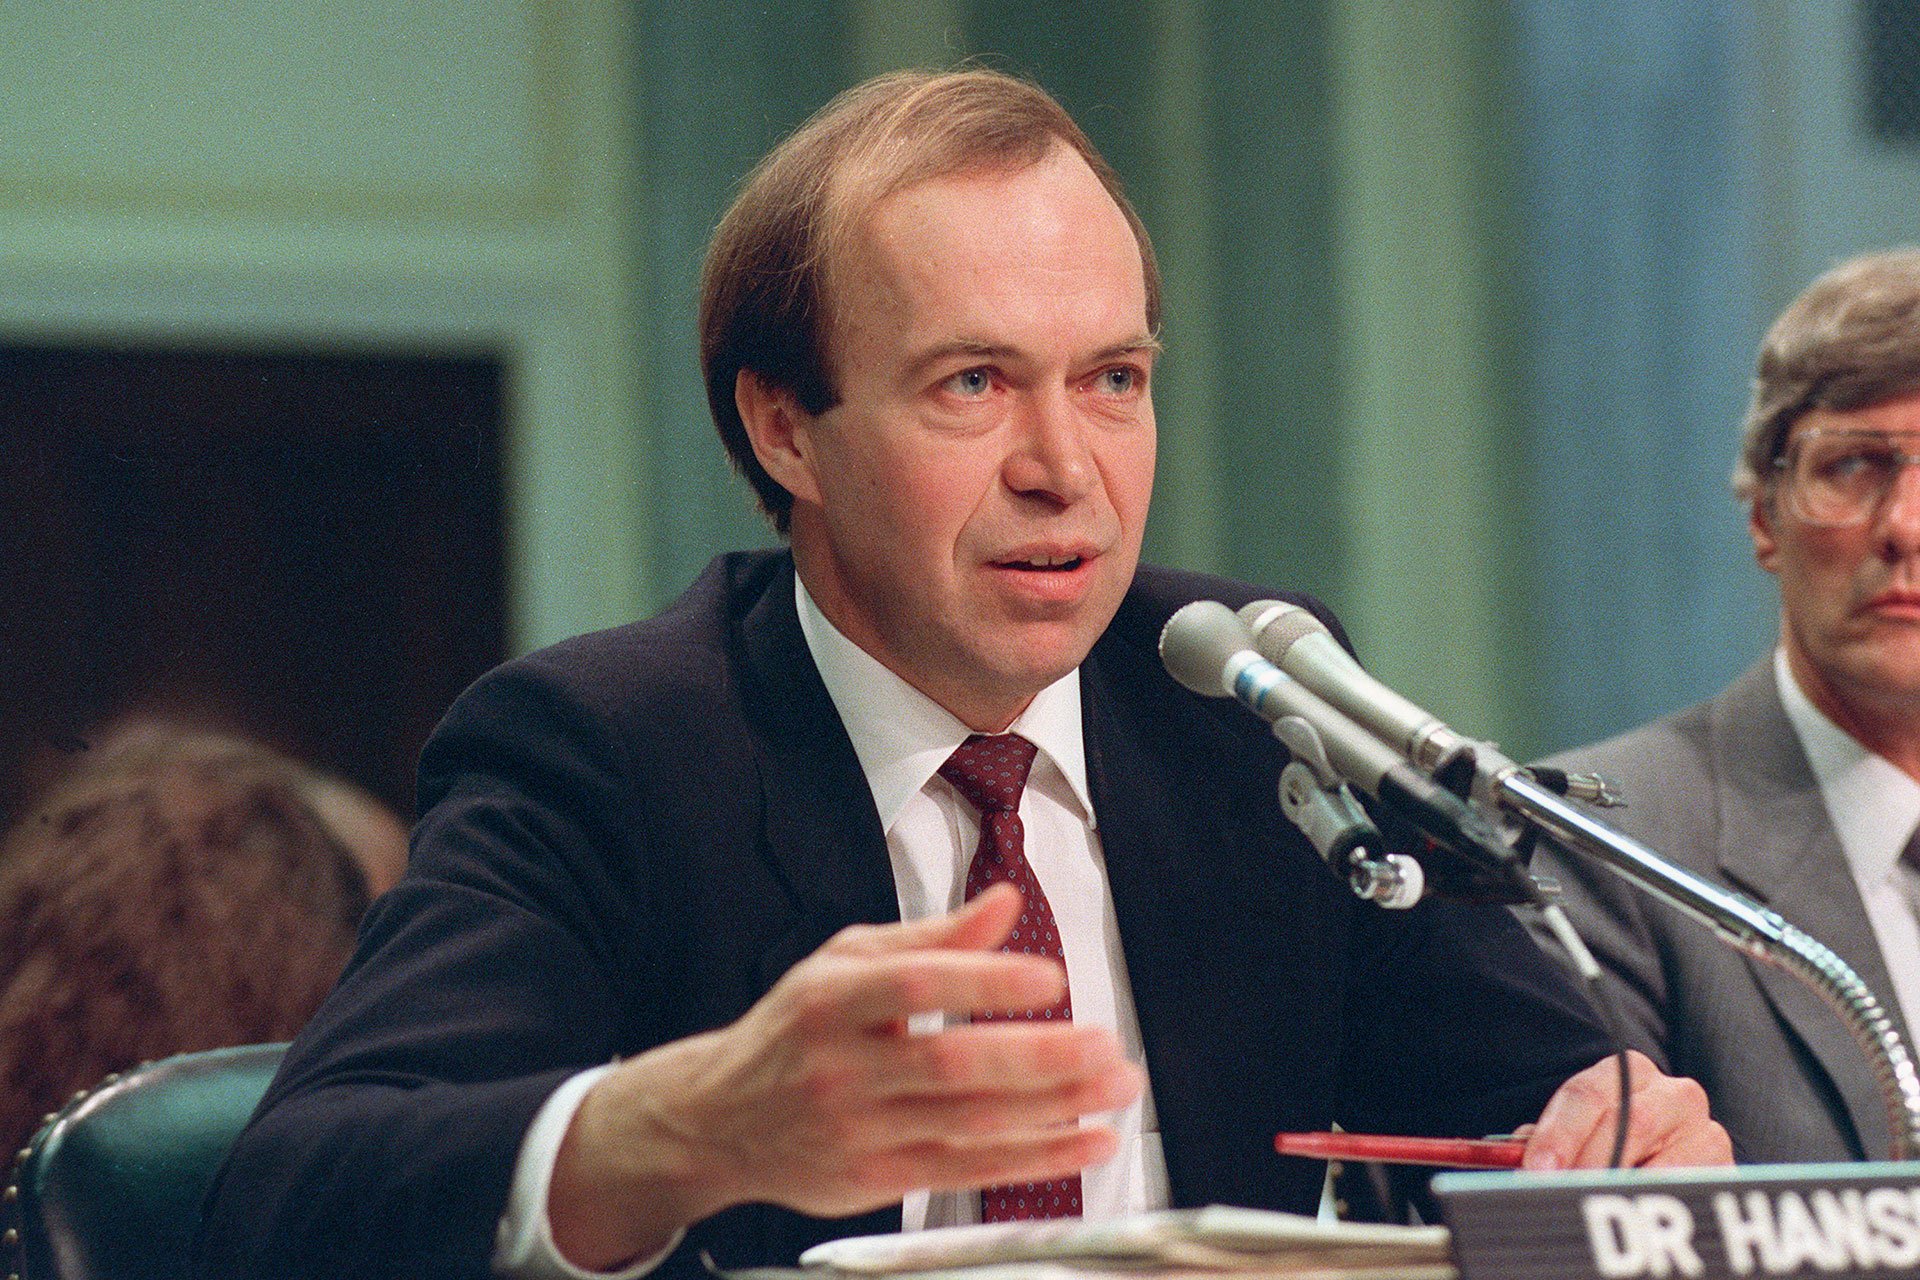 Dr. James Hansen, director of NASA's Goddard Institute for Space Studies in New York City, testified before a Senate transportation subcommittee in 1989, a year after his history-making testimony telling the world that global warming was here and would get worse.